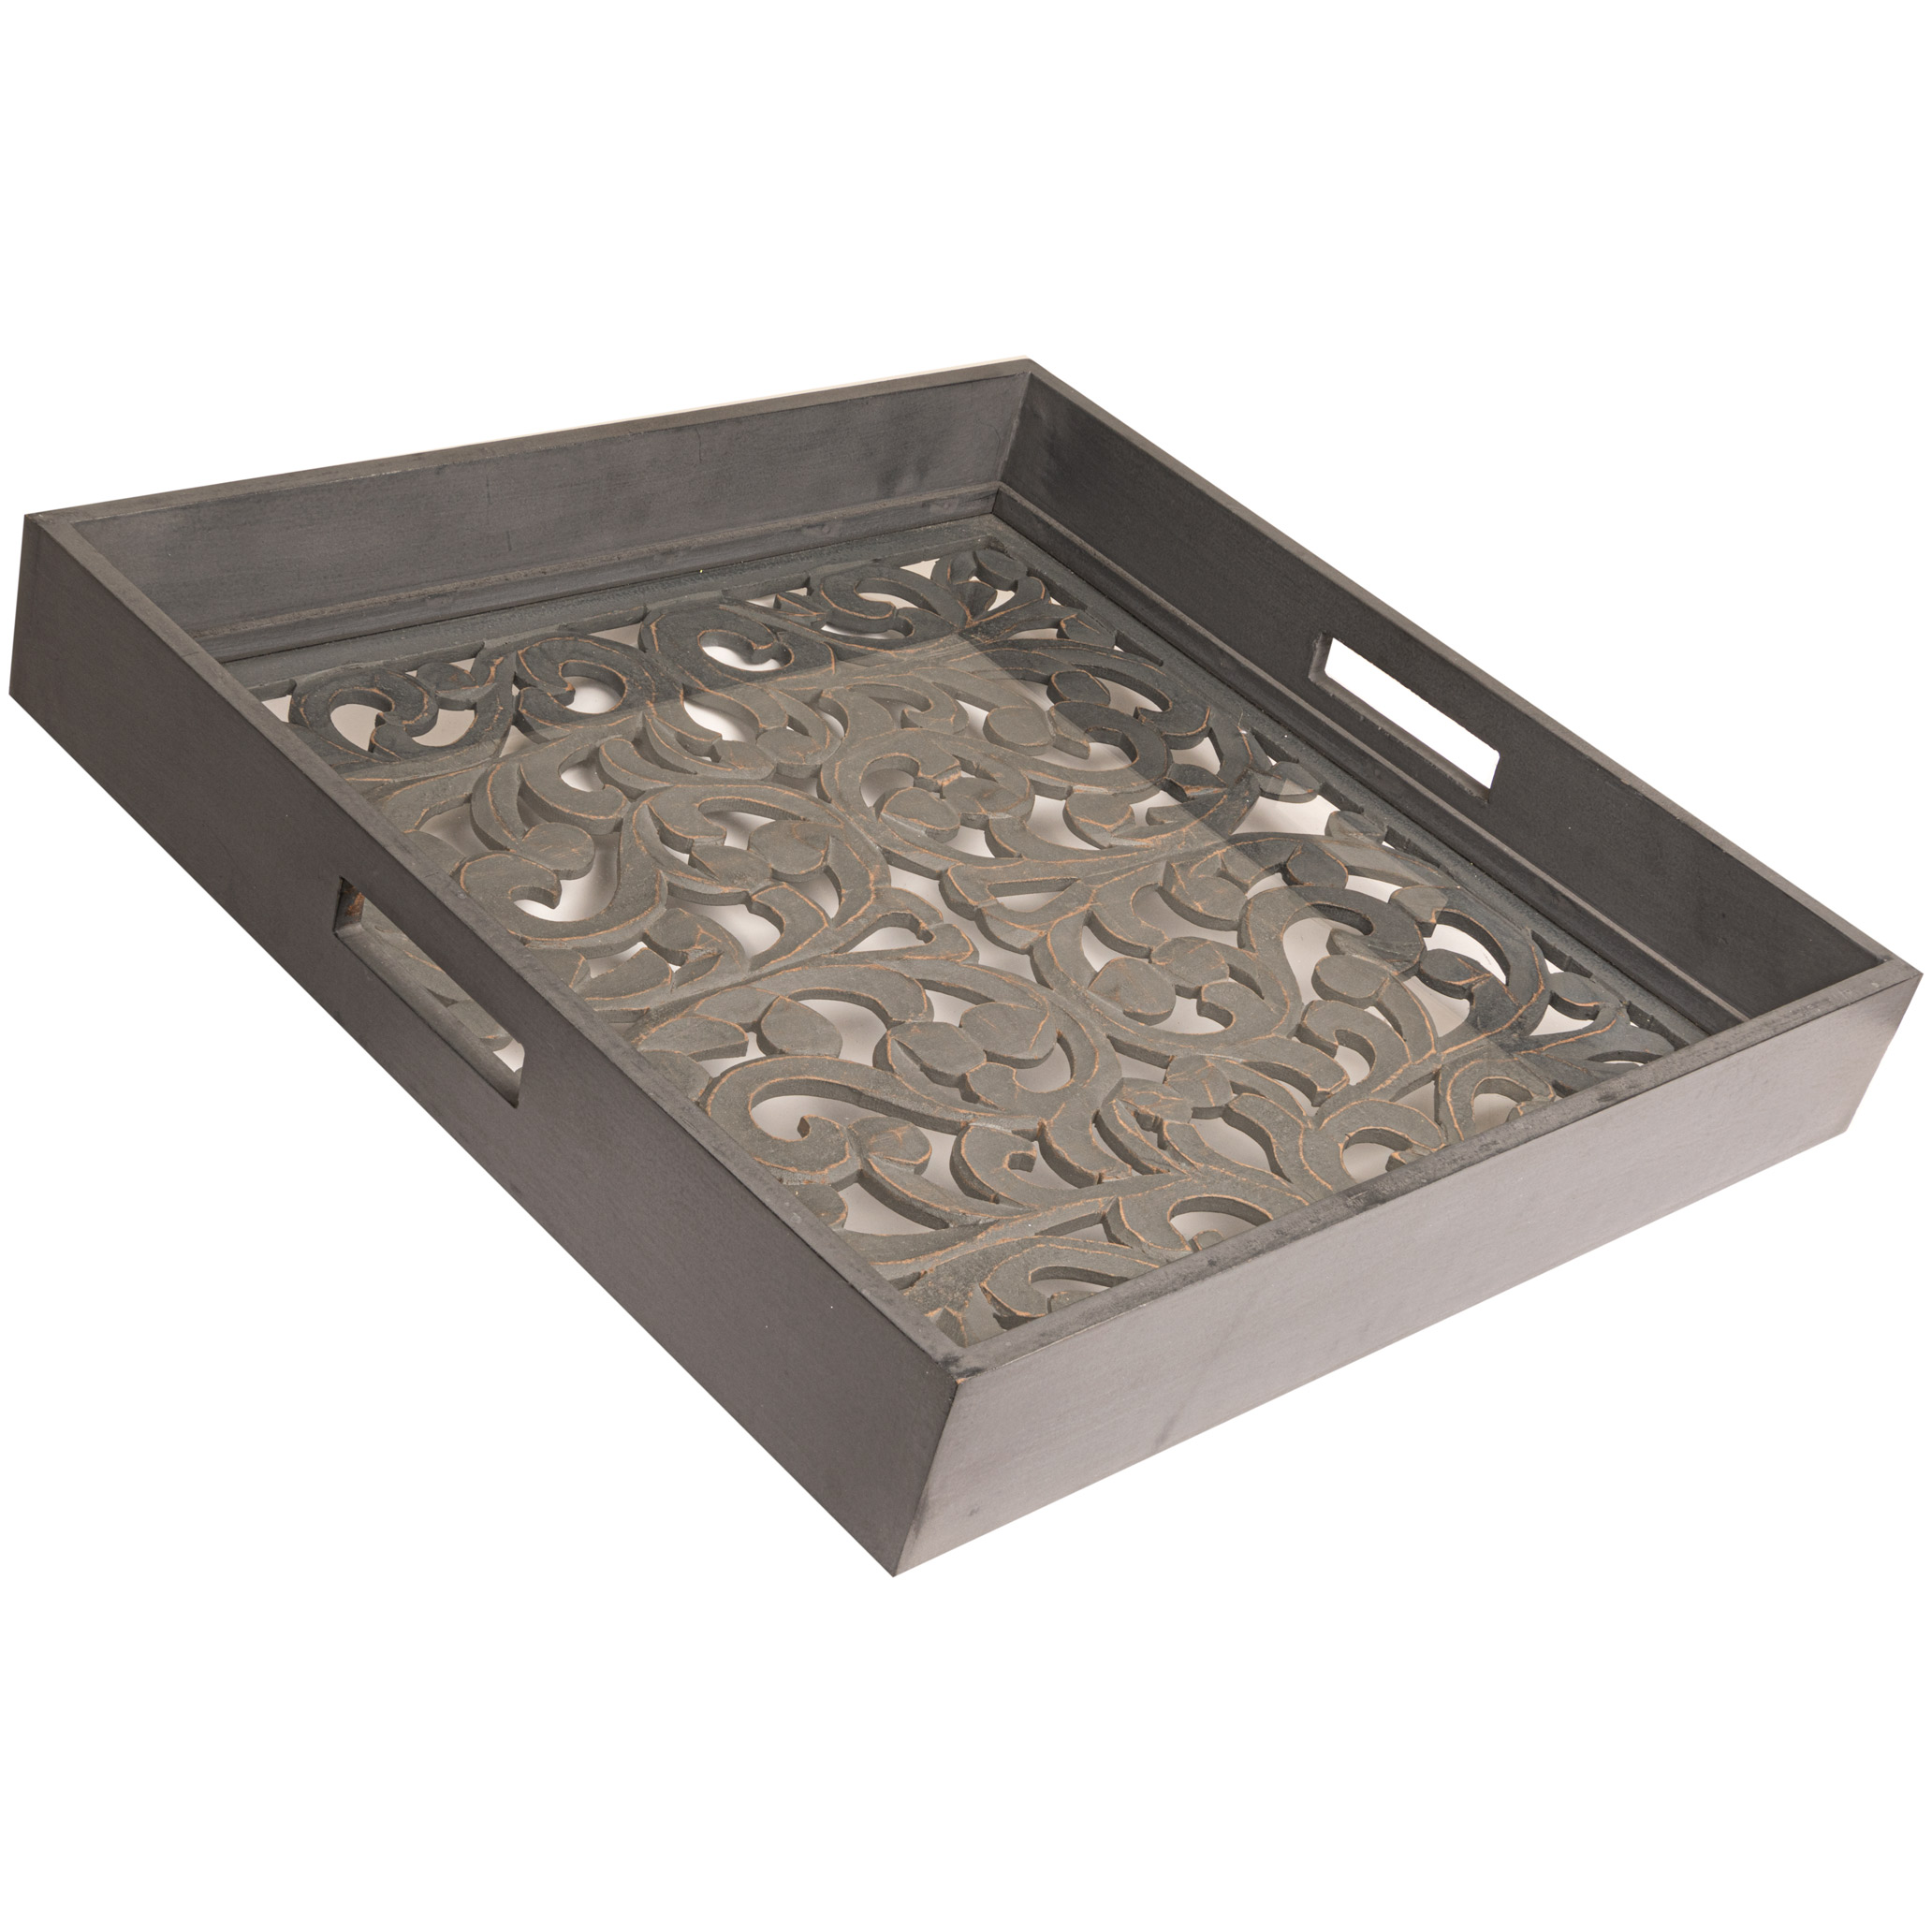 Square Carved Louis Tray - Image 1